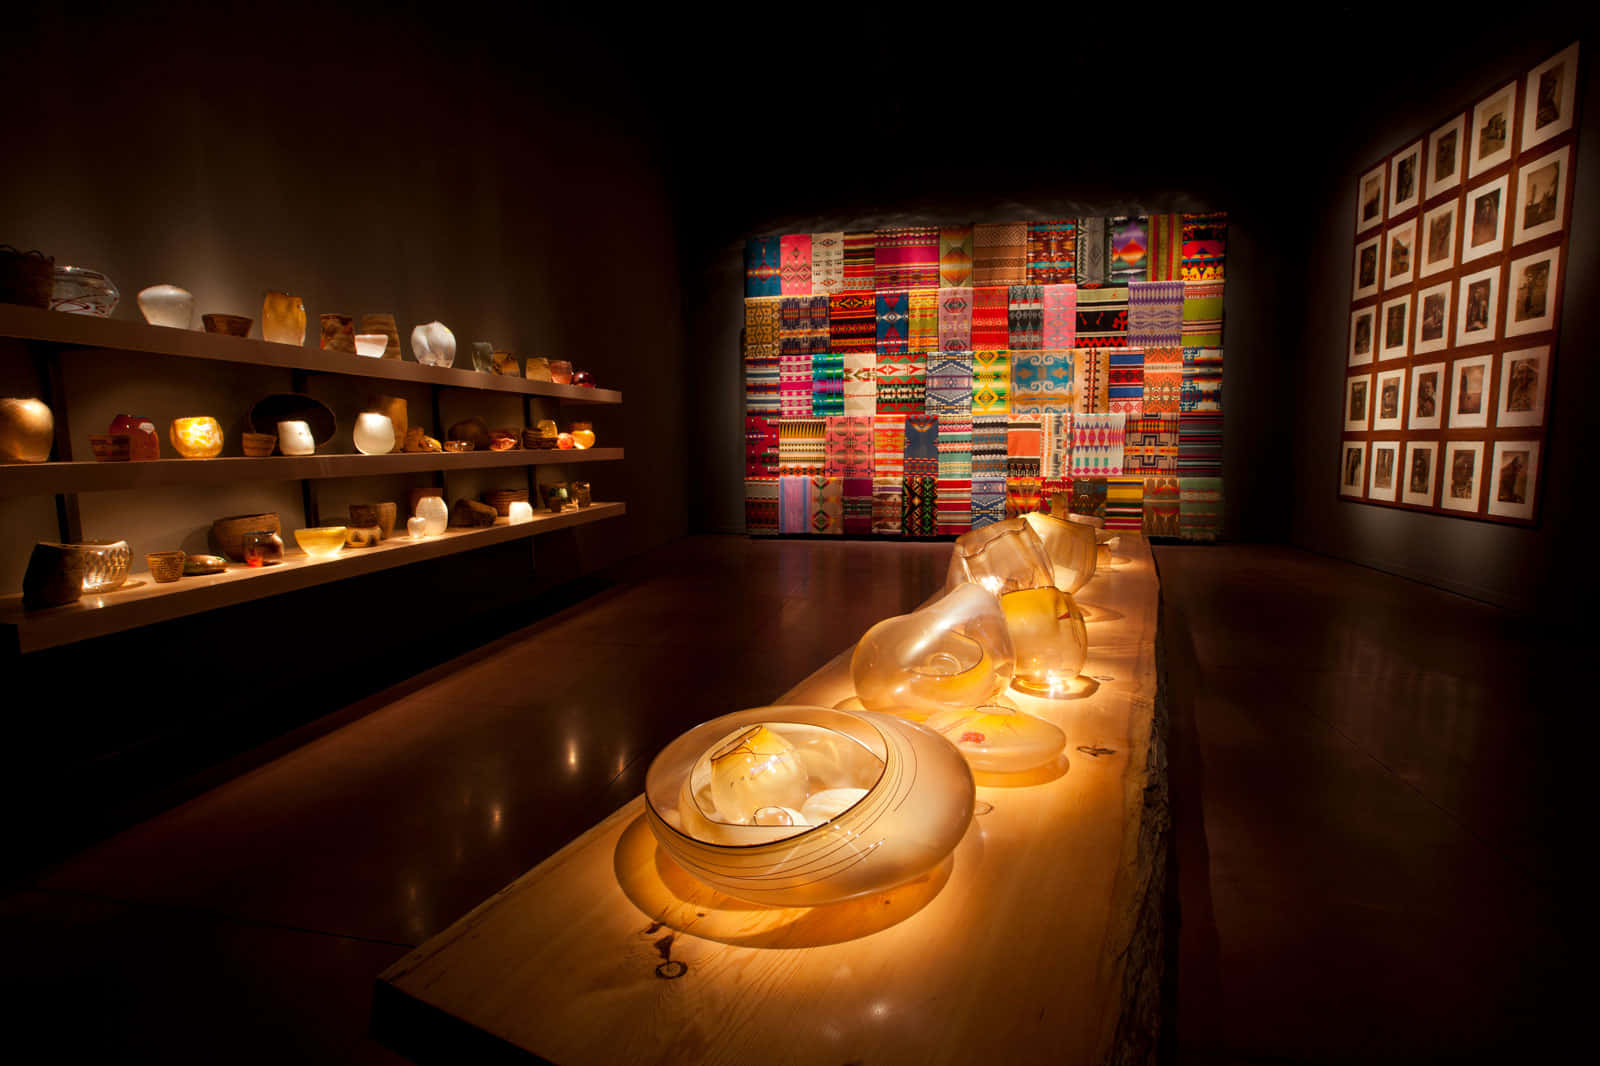 Chihuly Glass Art Exhibit Interior Wallpaper